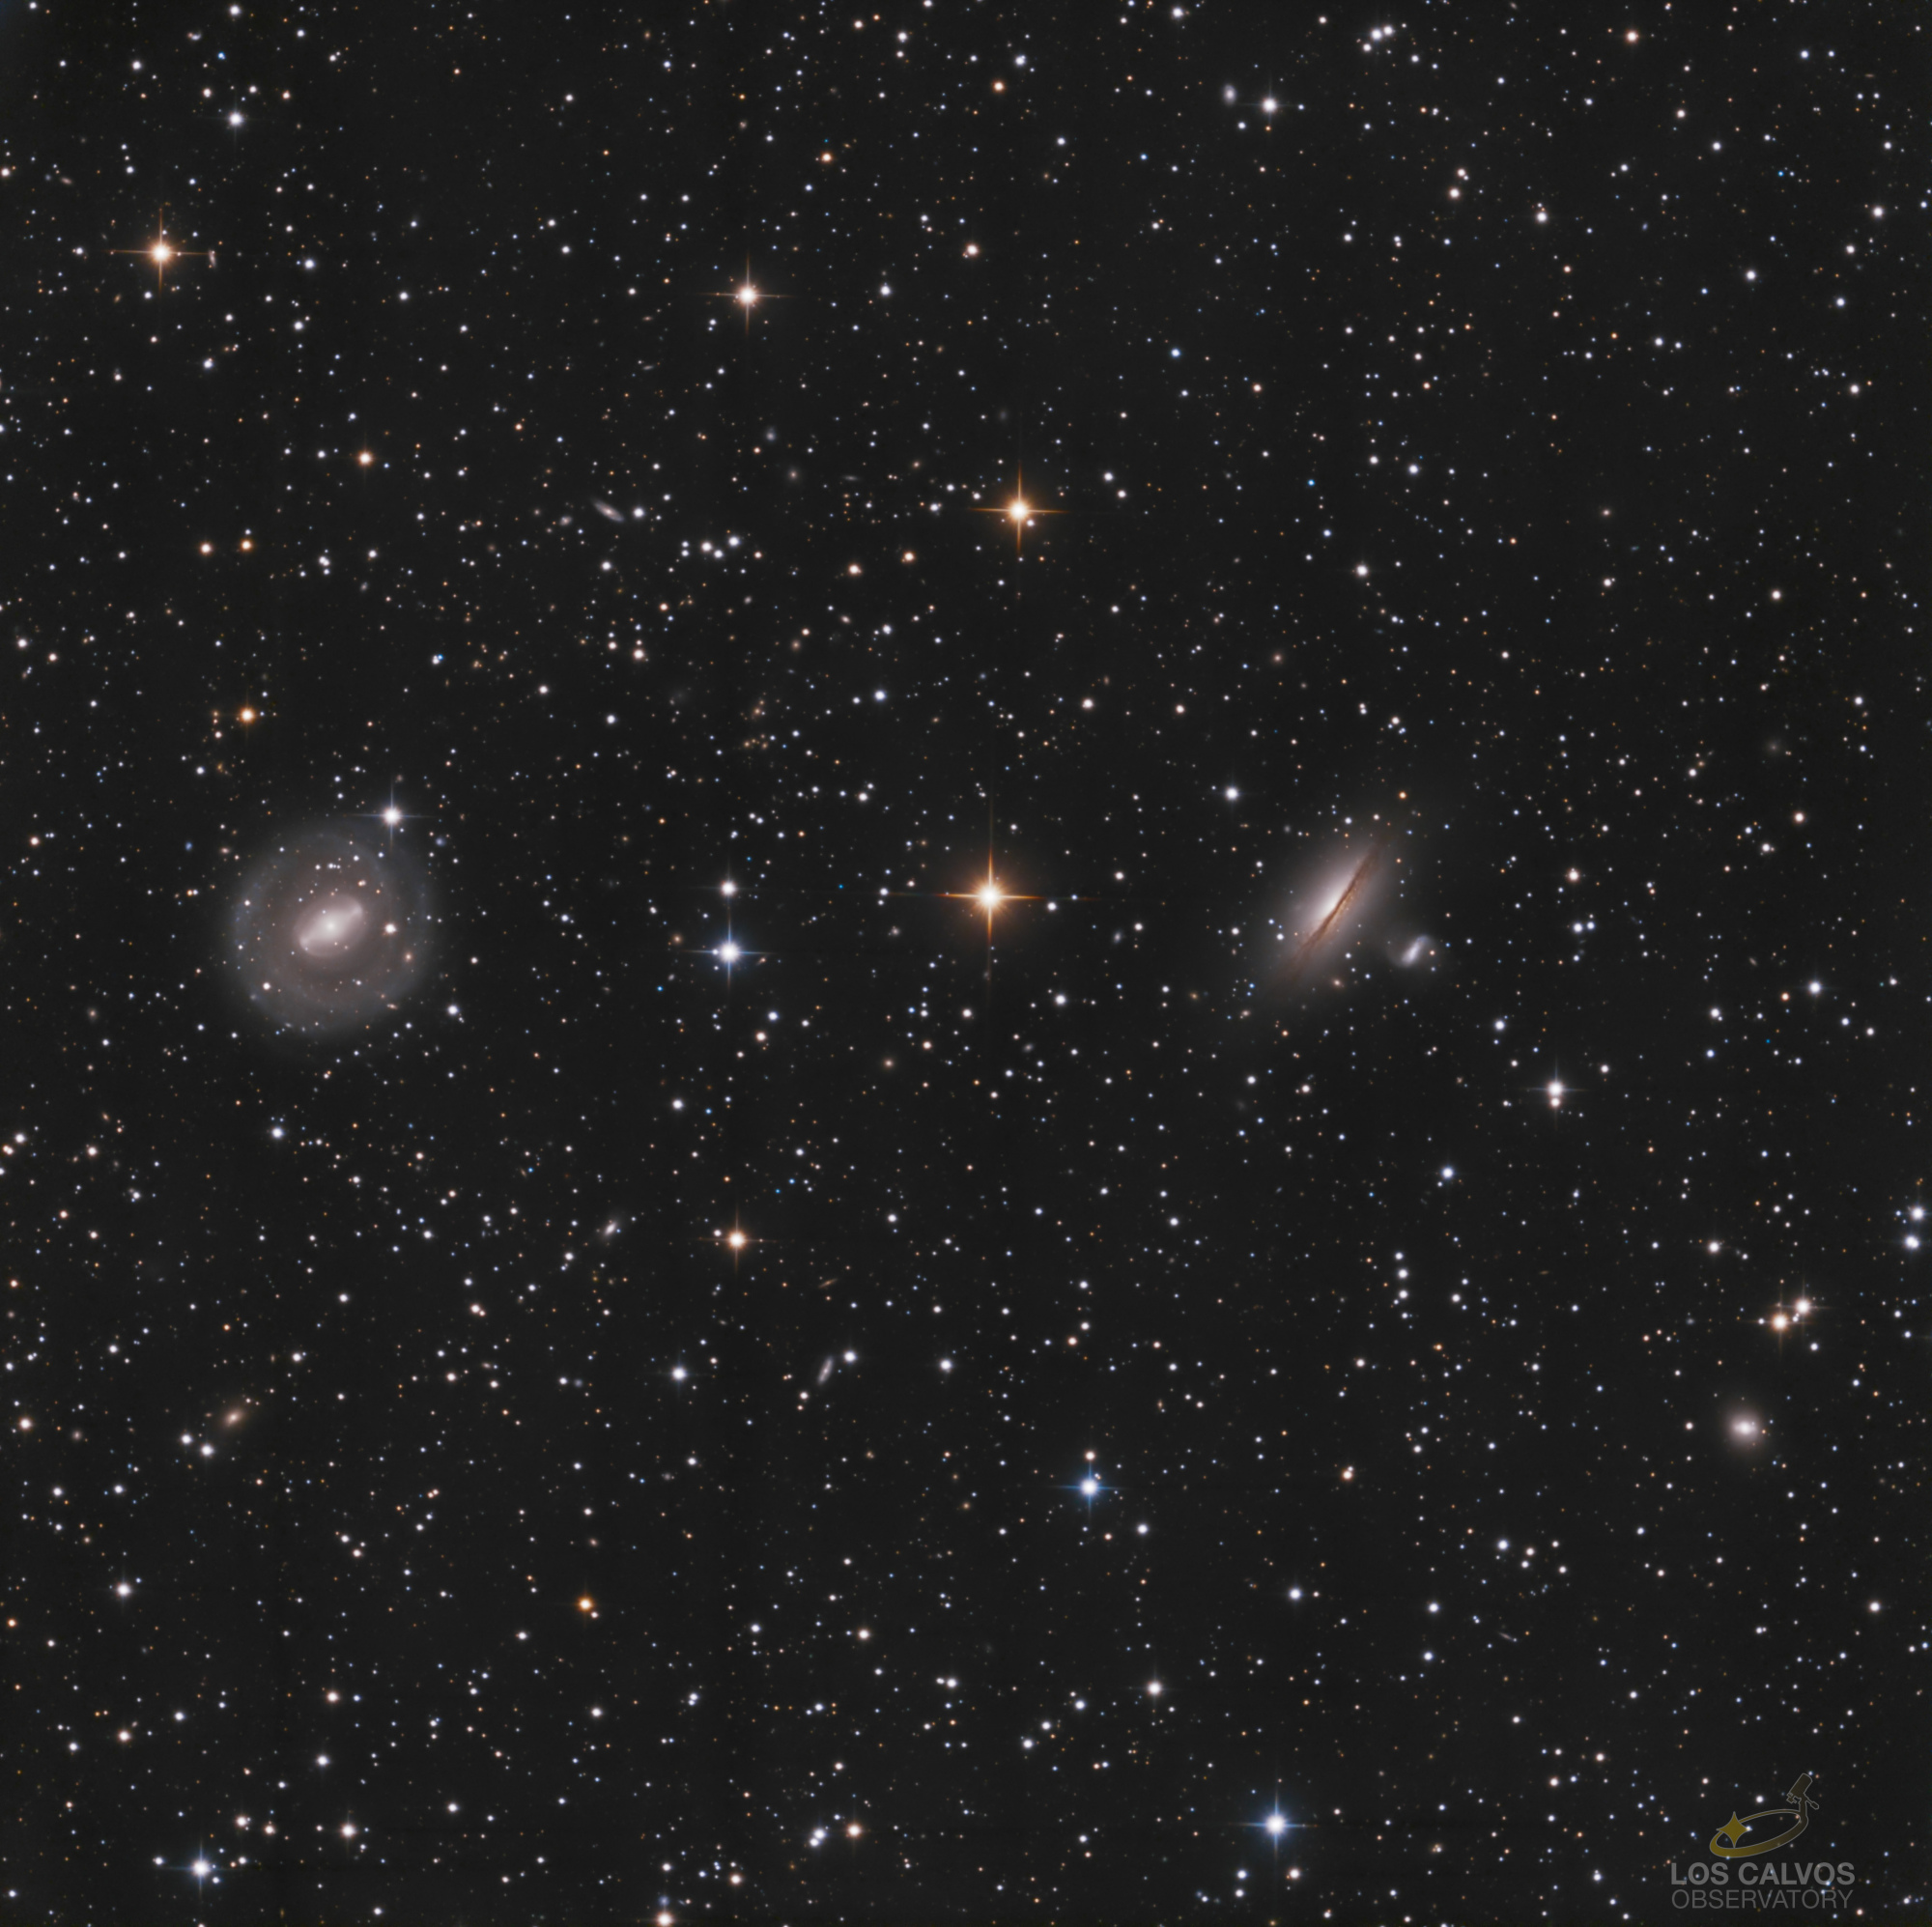 NGC_5101_Drizzle_BruteRGB_DBE_MMT80_NLLog+crb_PS_copie-resized&crp_Logo.jpg